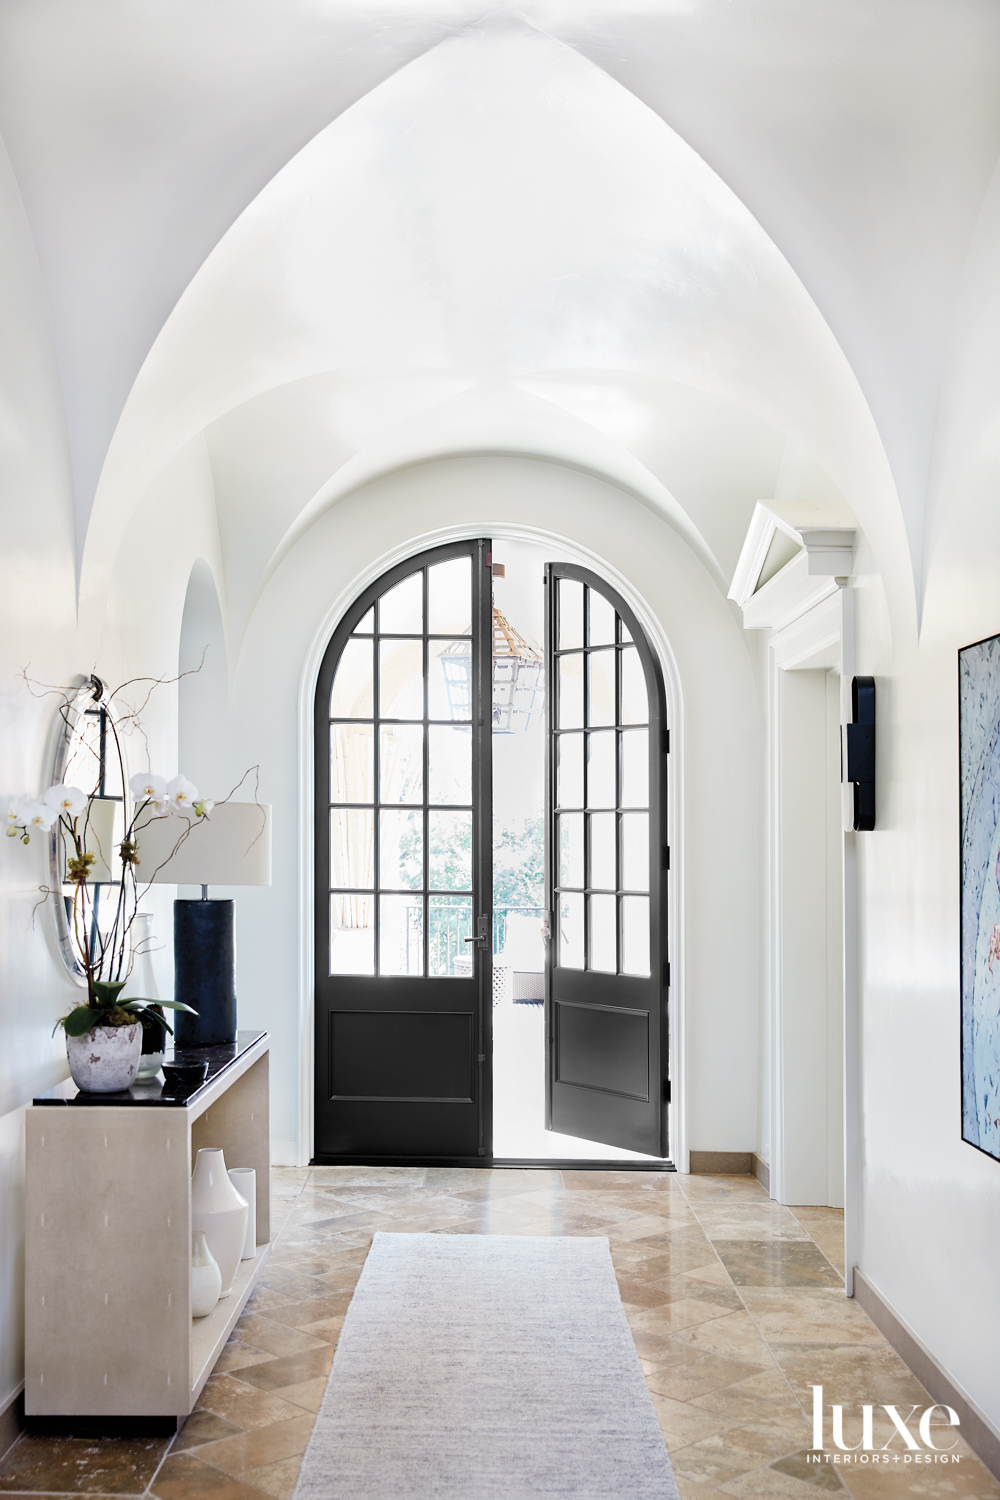 Well-lighted entryway with barrel-vaulted ceiling...